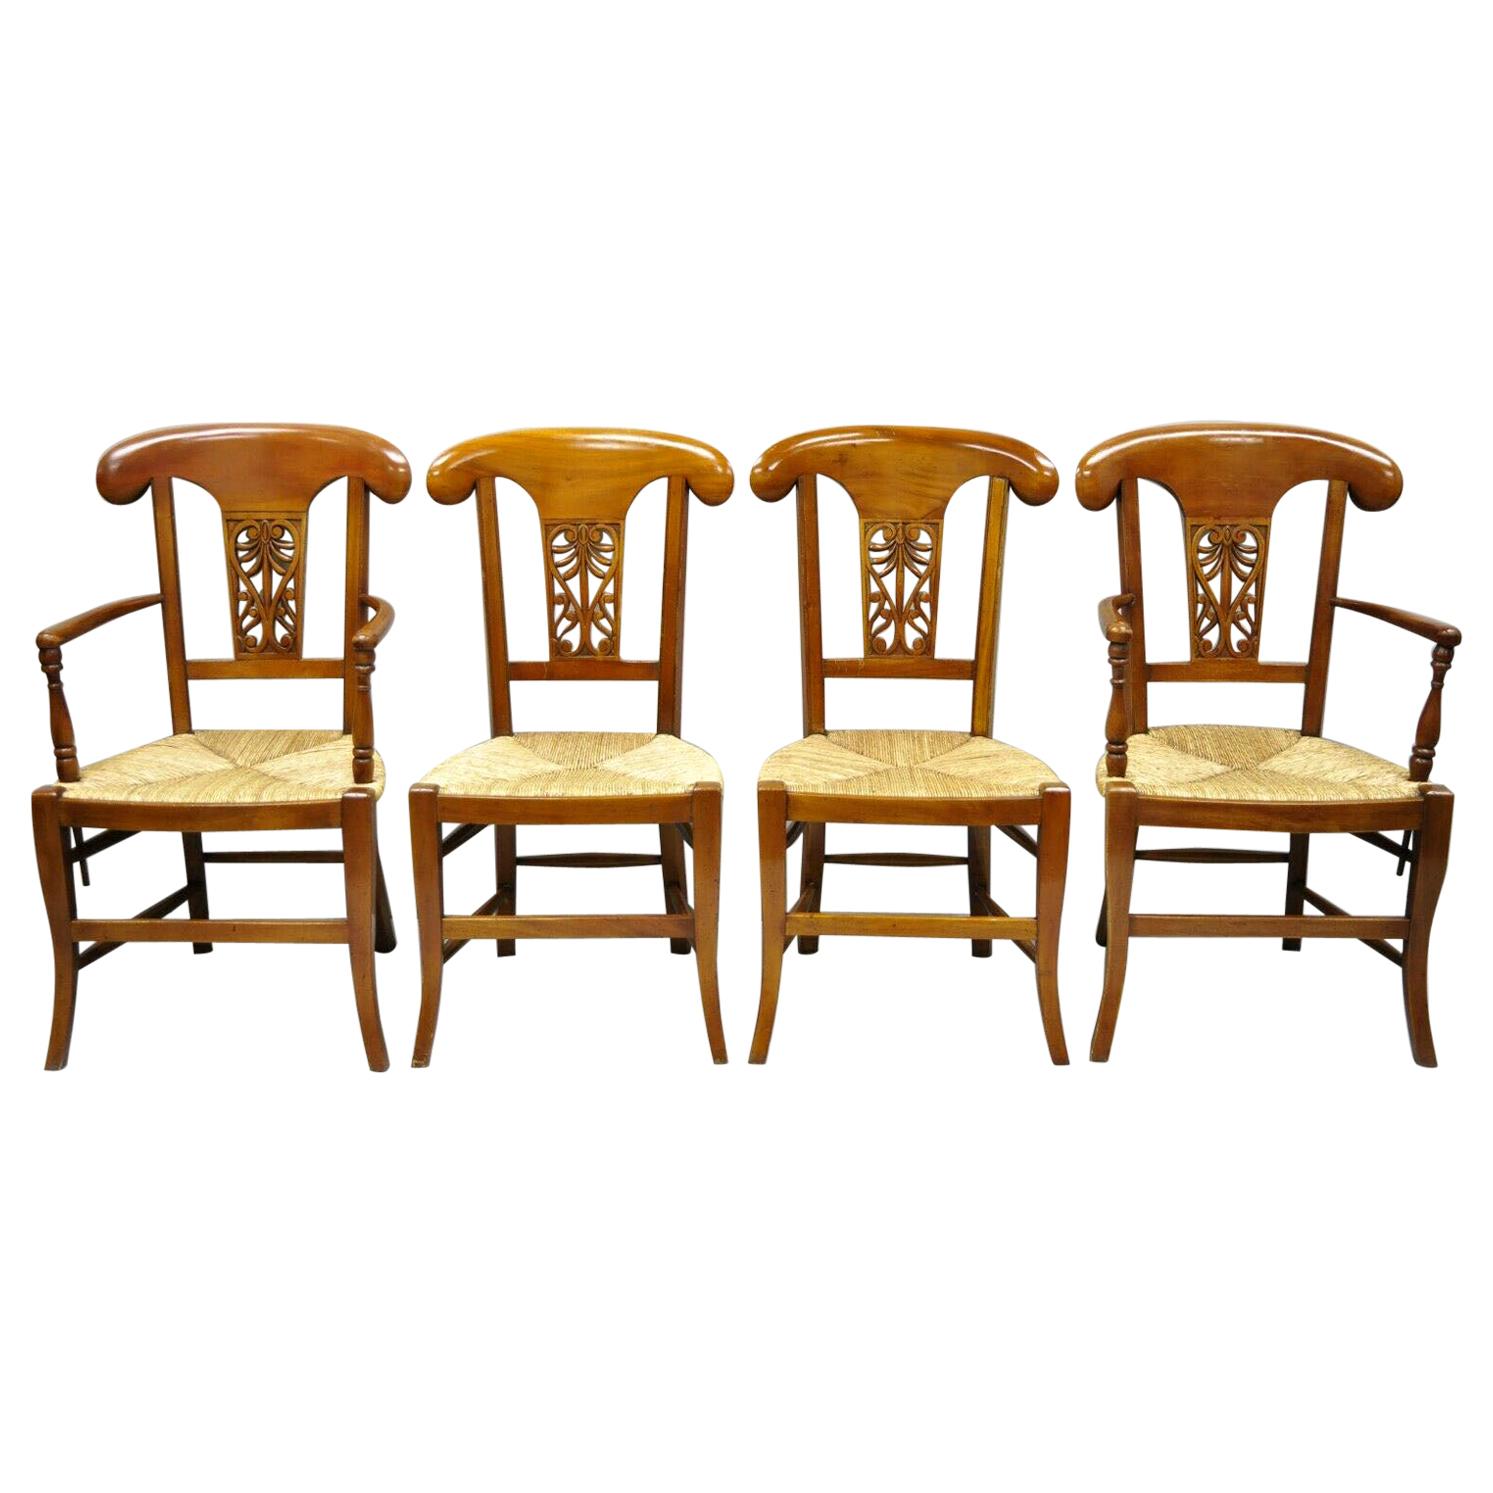 Set of 4 Country French Provincial Carved Cherrywood Rush Seat Dining Chairs